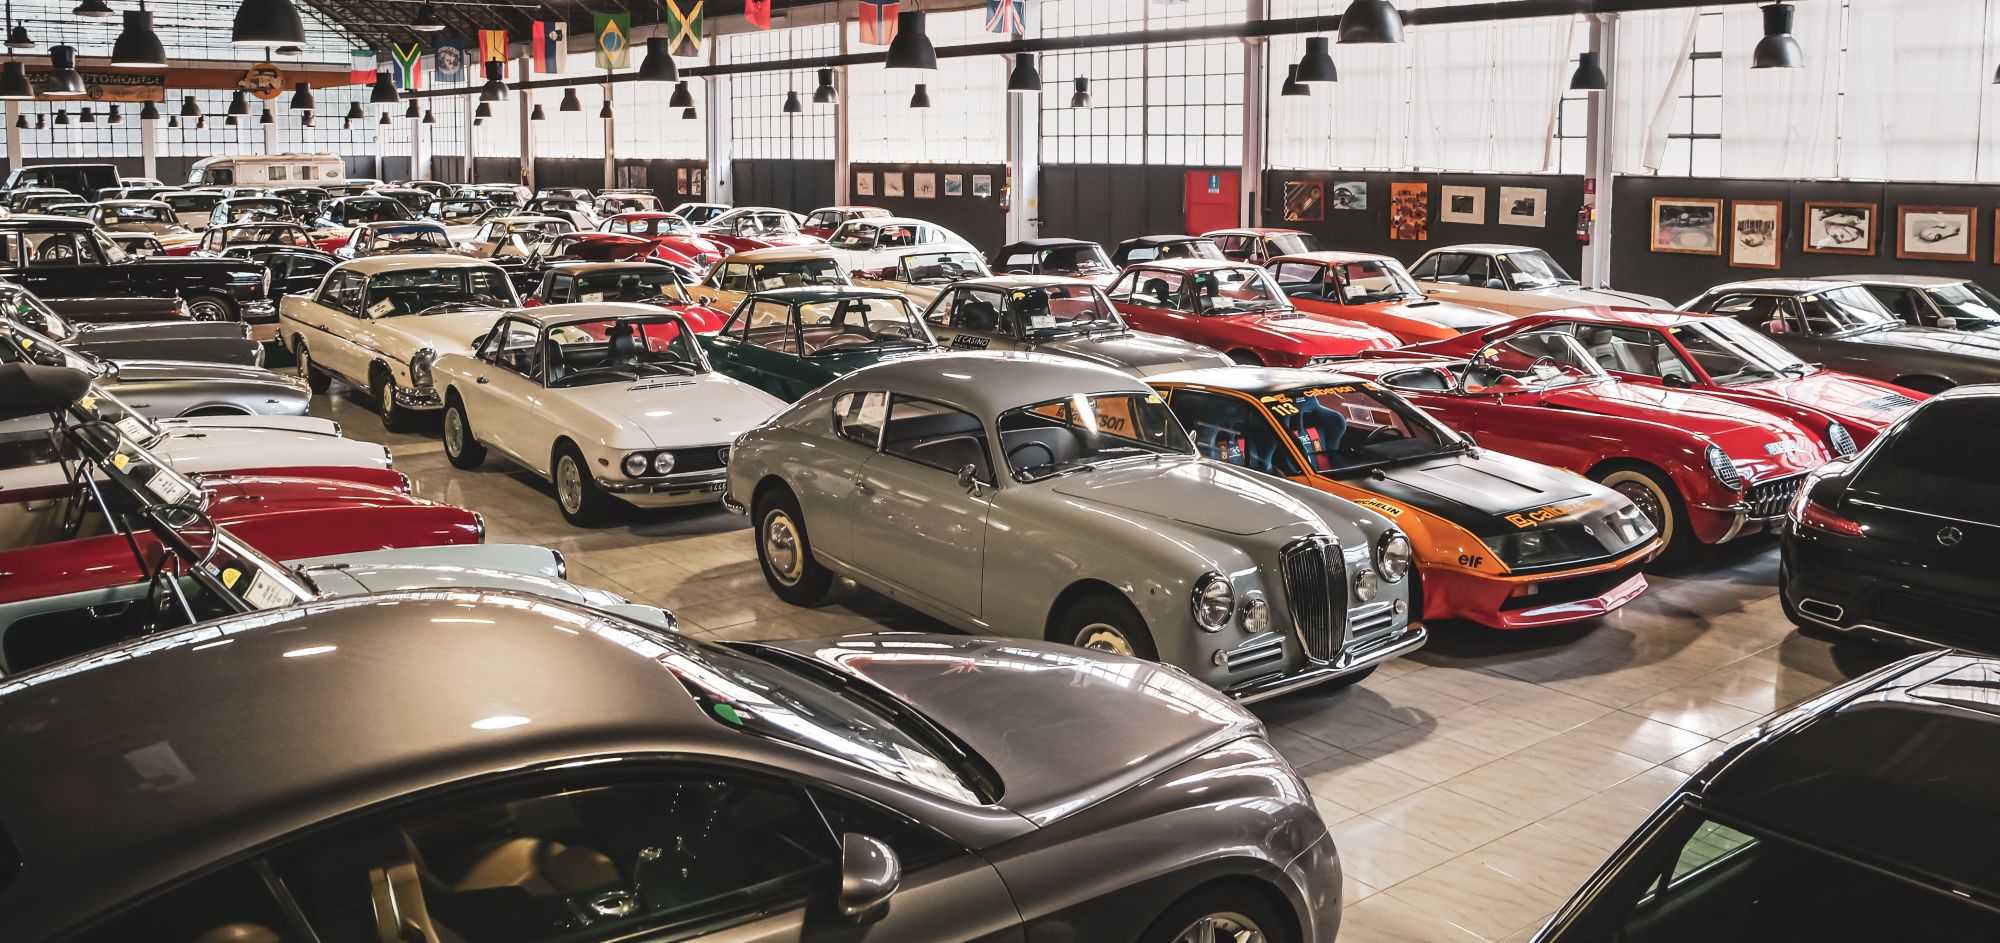 Classic and historic cars for sale